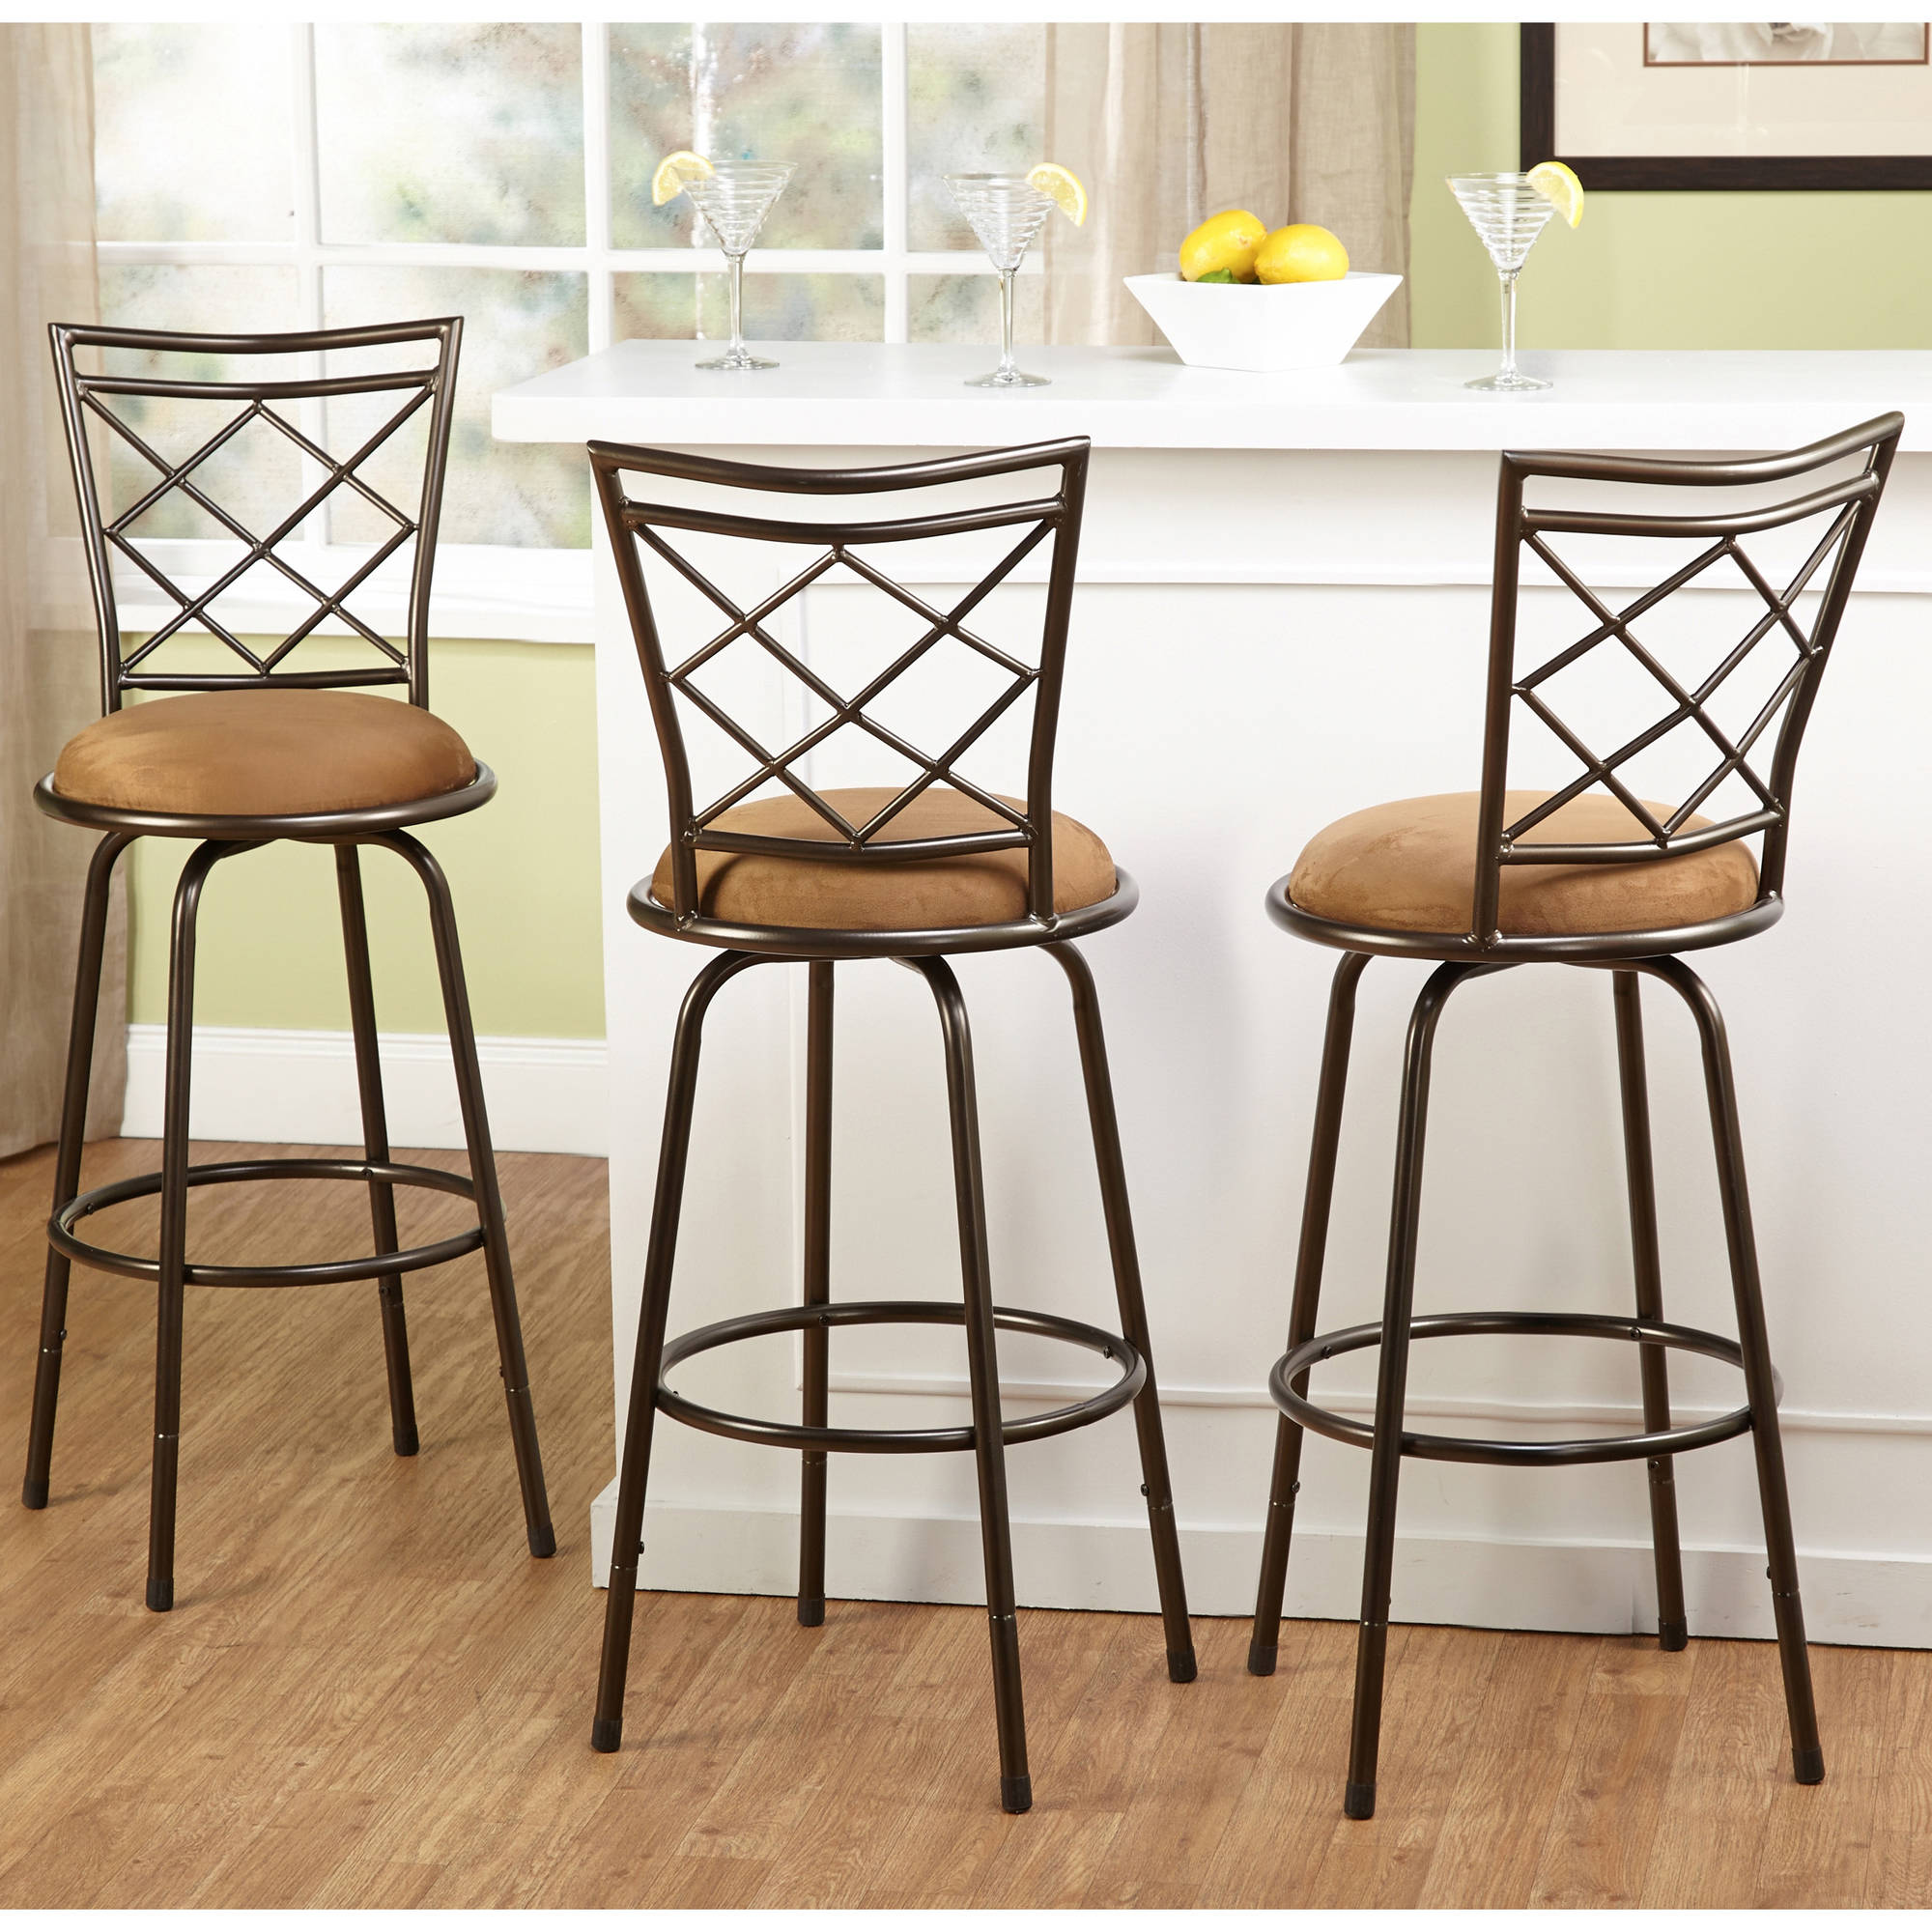 TMS Avery Bar Stool with Swivel & Adjustable Height, Brown, Set of 3 - image 1 of 3